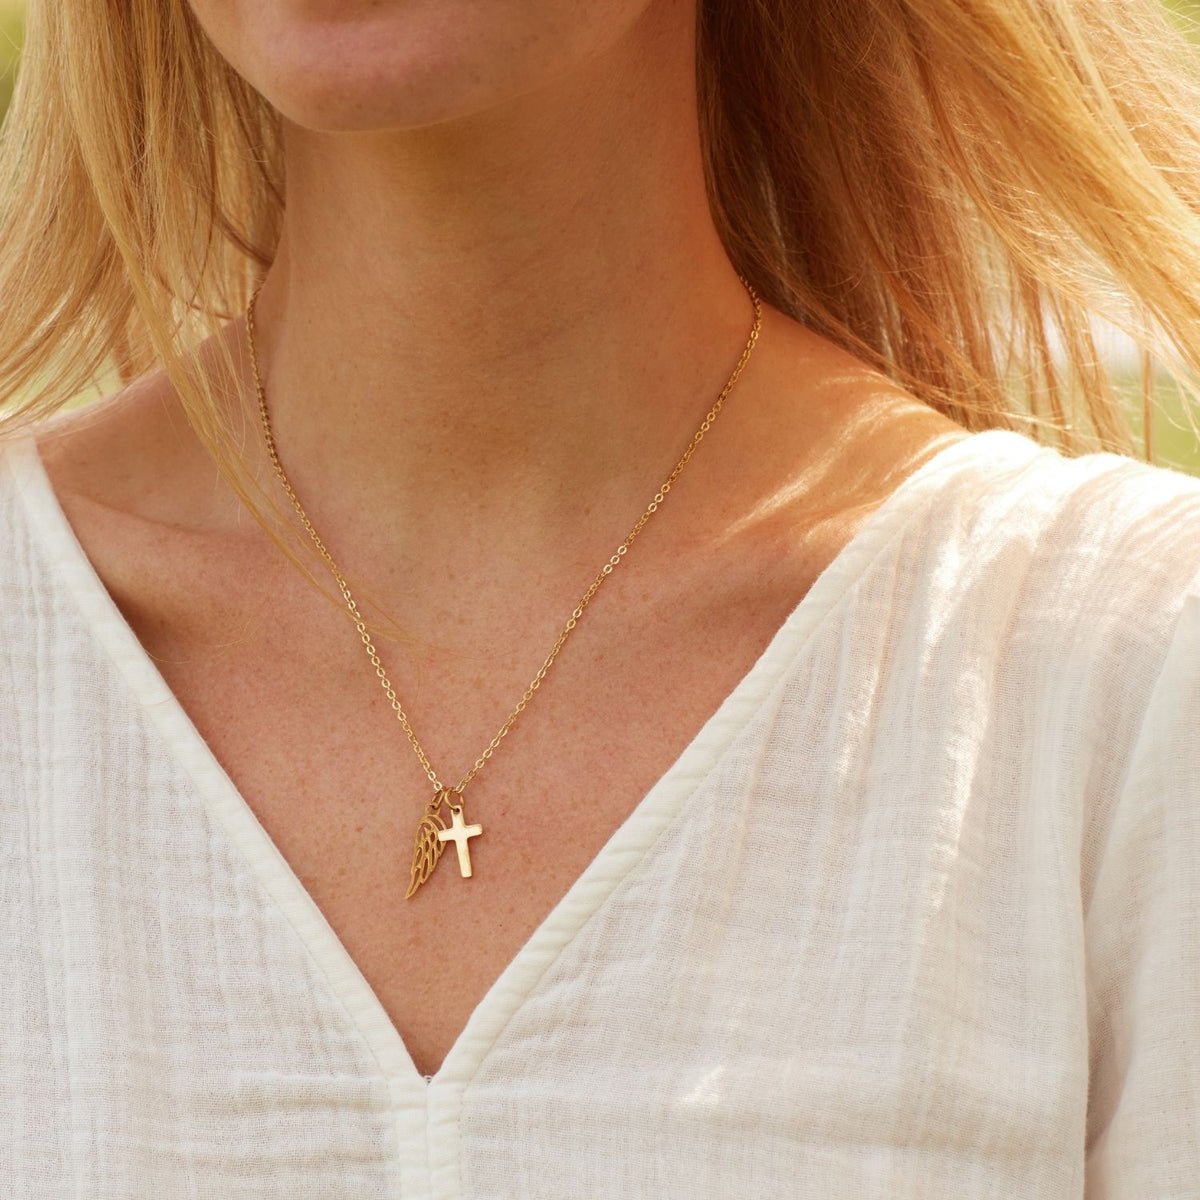 Mama of An Angel | Carried You Every Second | Cross Necklace